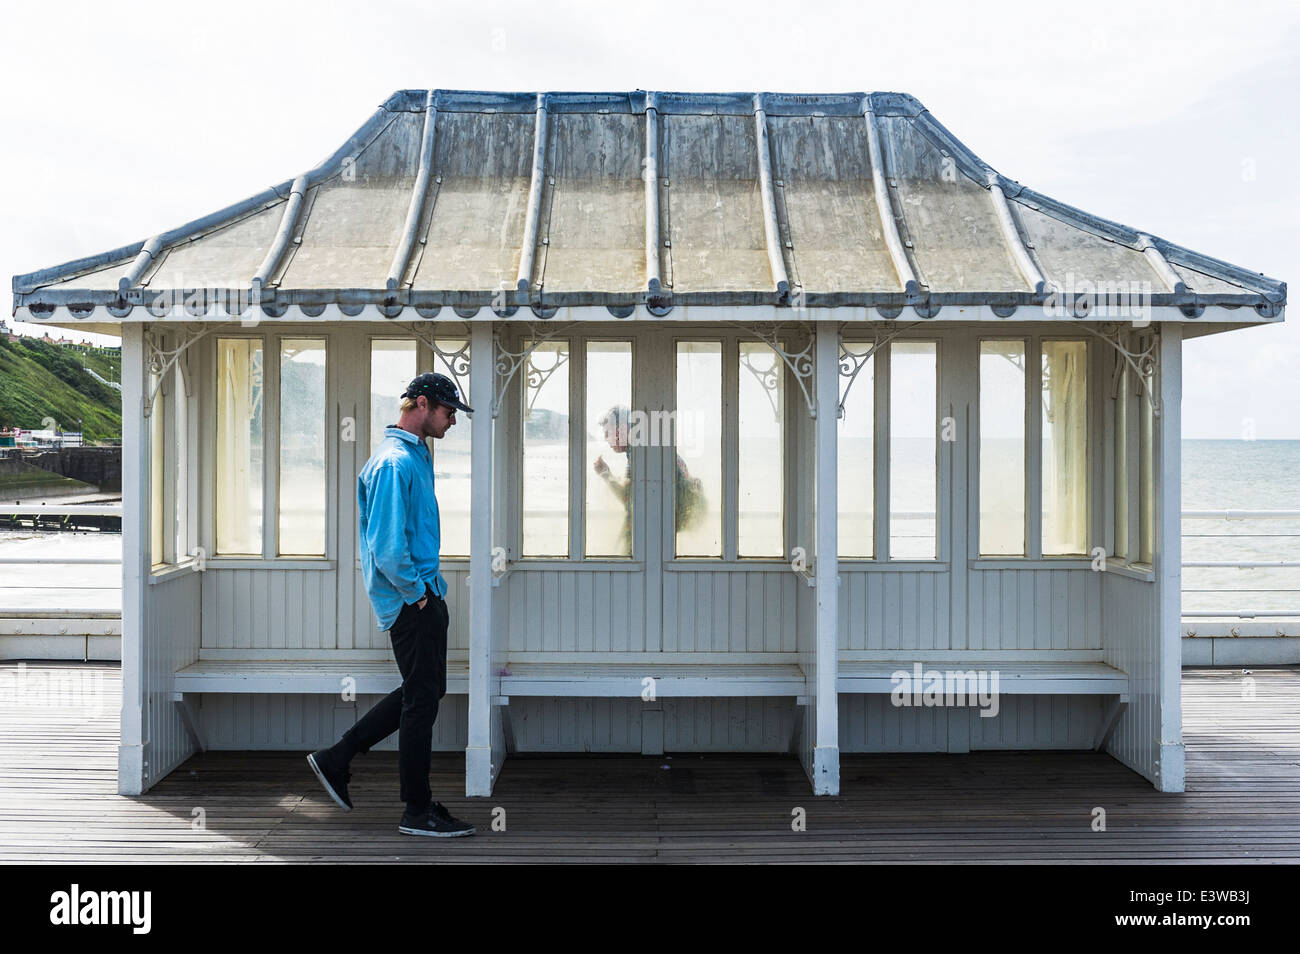 People walking past a shelter on Cromer Pier. Stock Photo